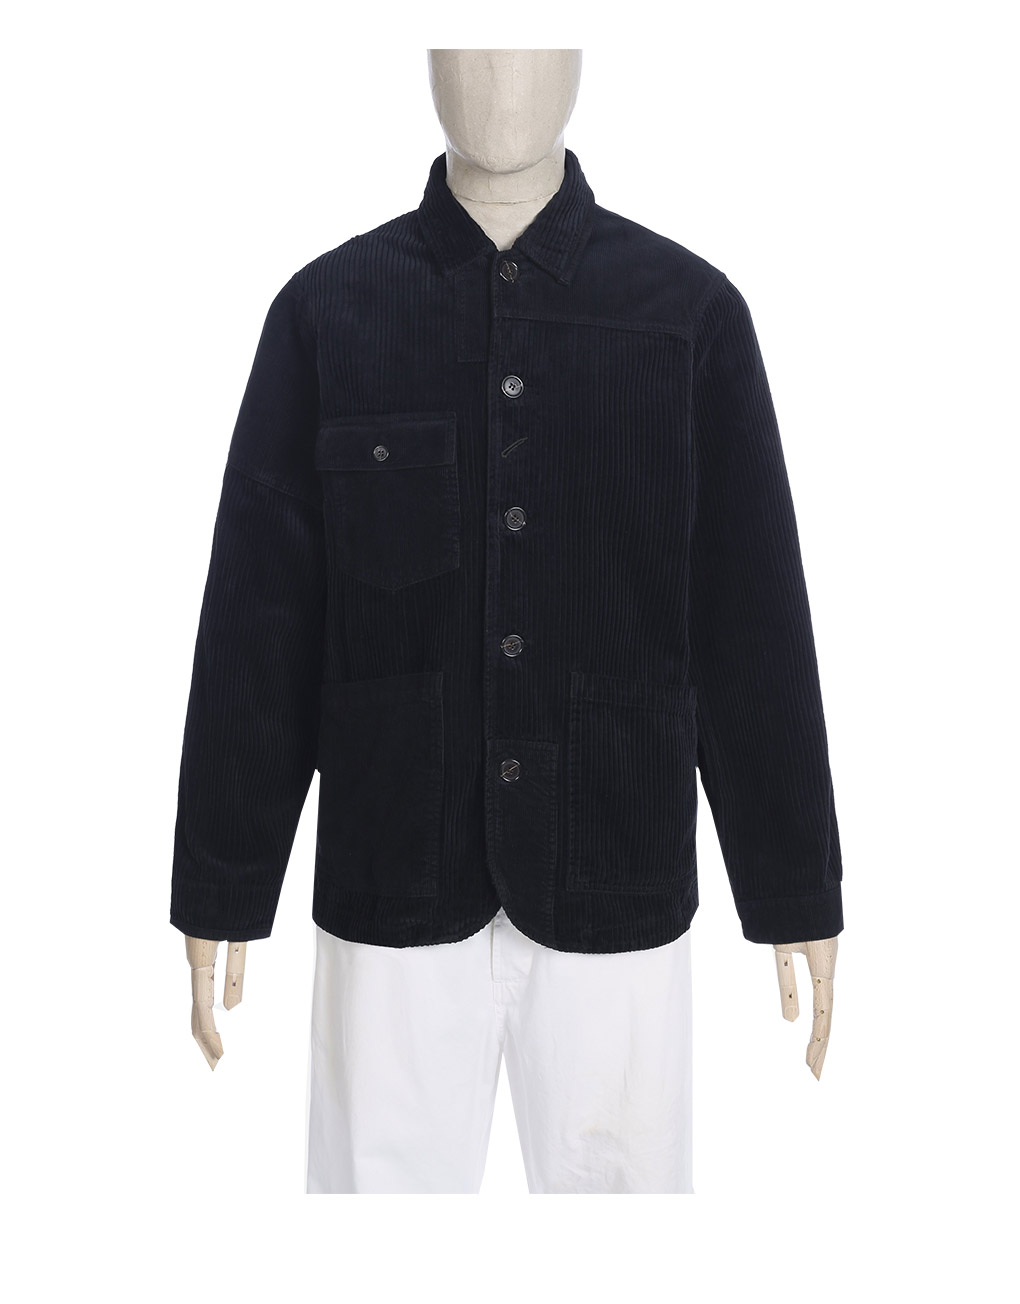 Universal Works – Patched mill bakers jacket in black jumbo cord